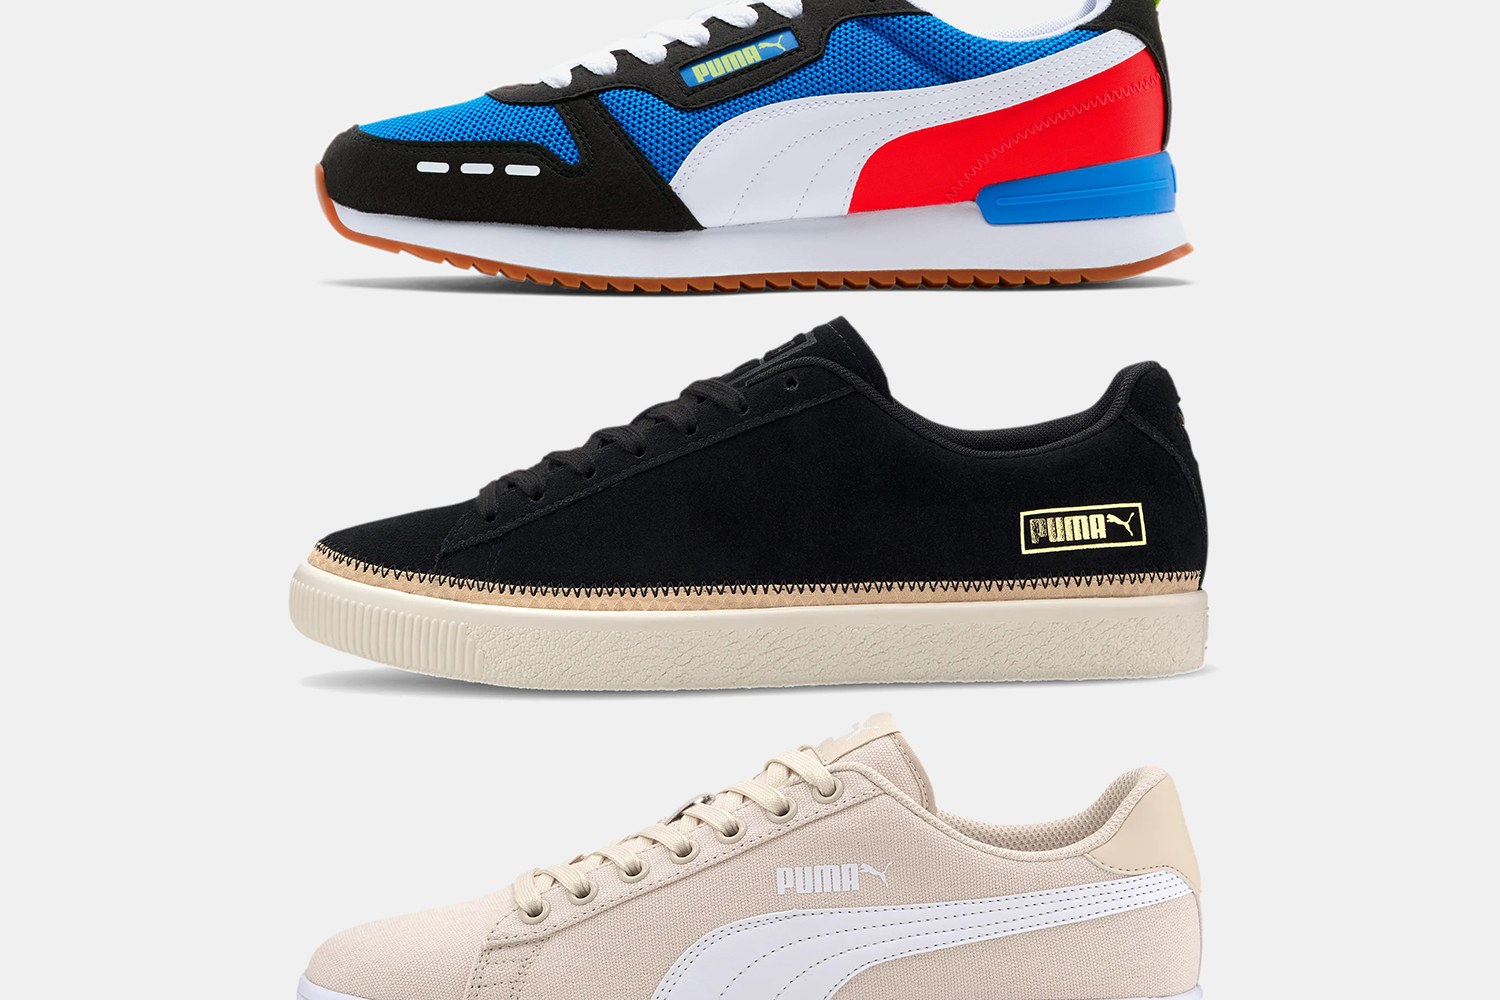 Puma Sneakers Are Up to 70% Off During 